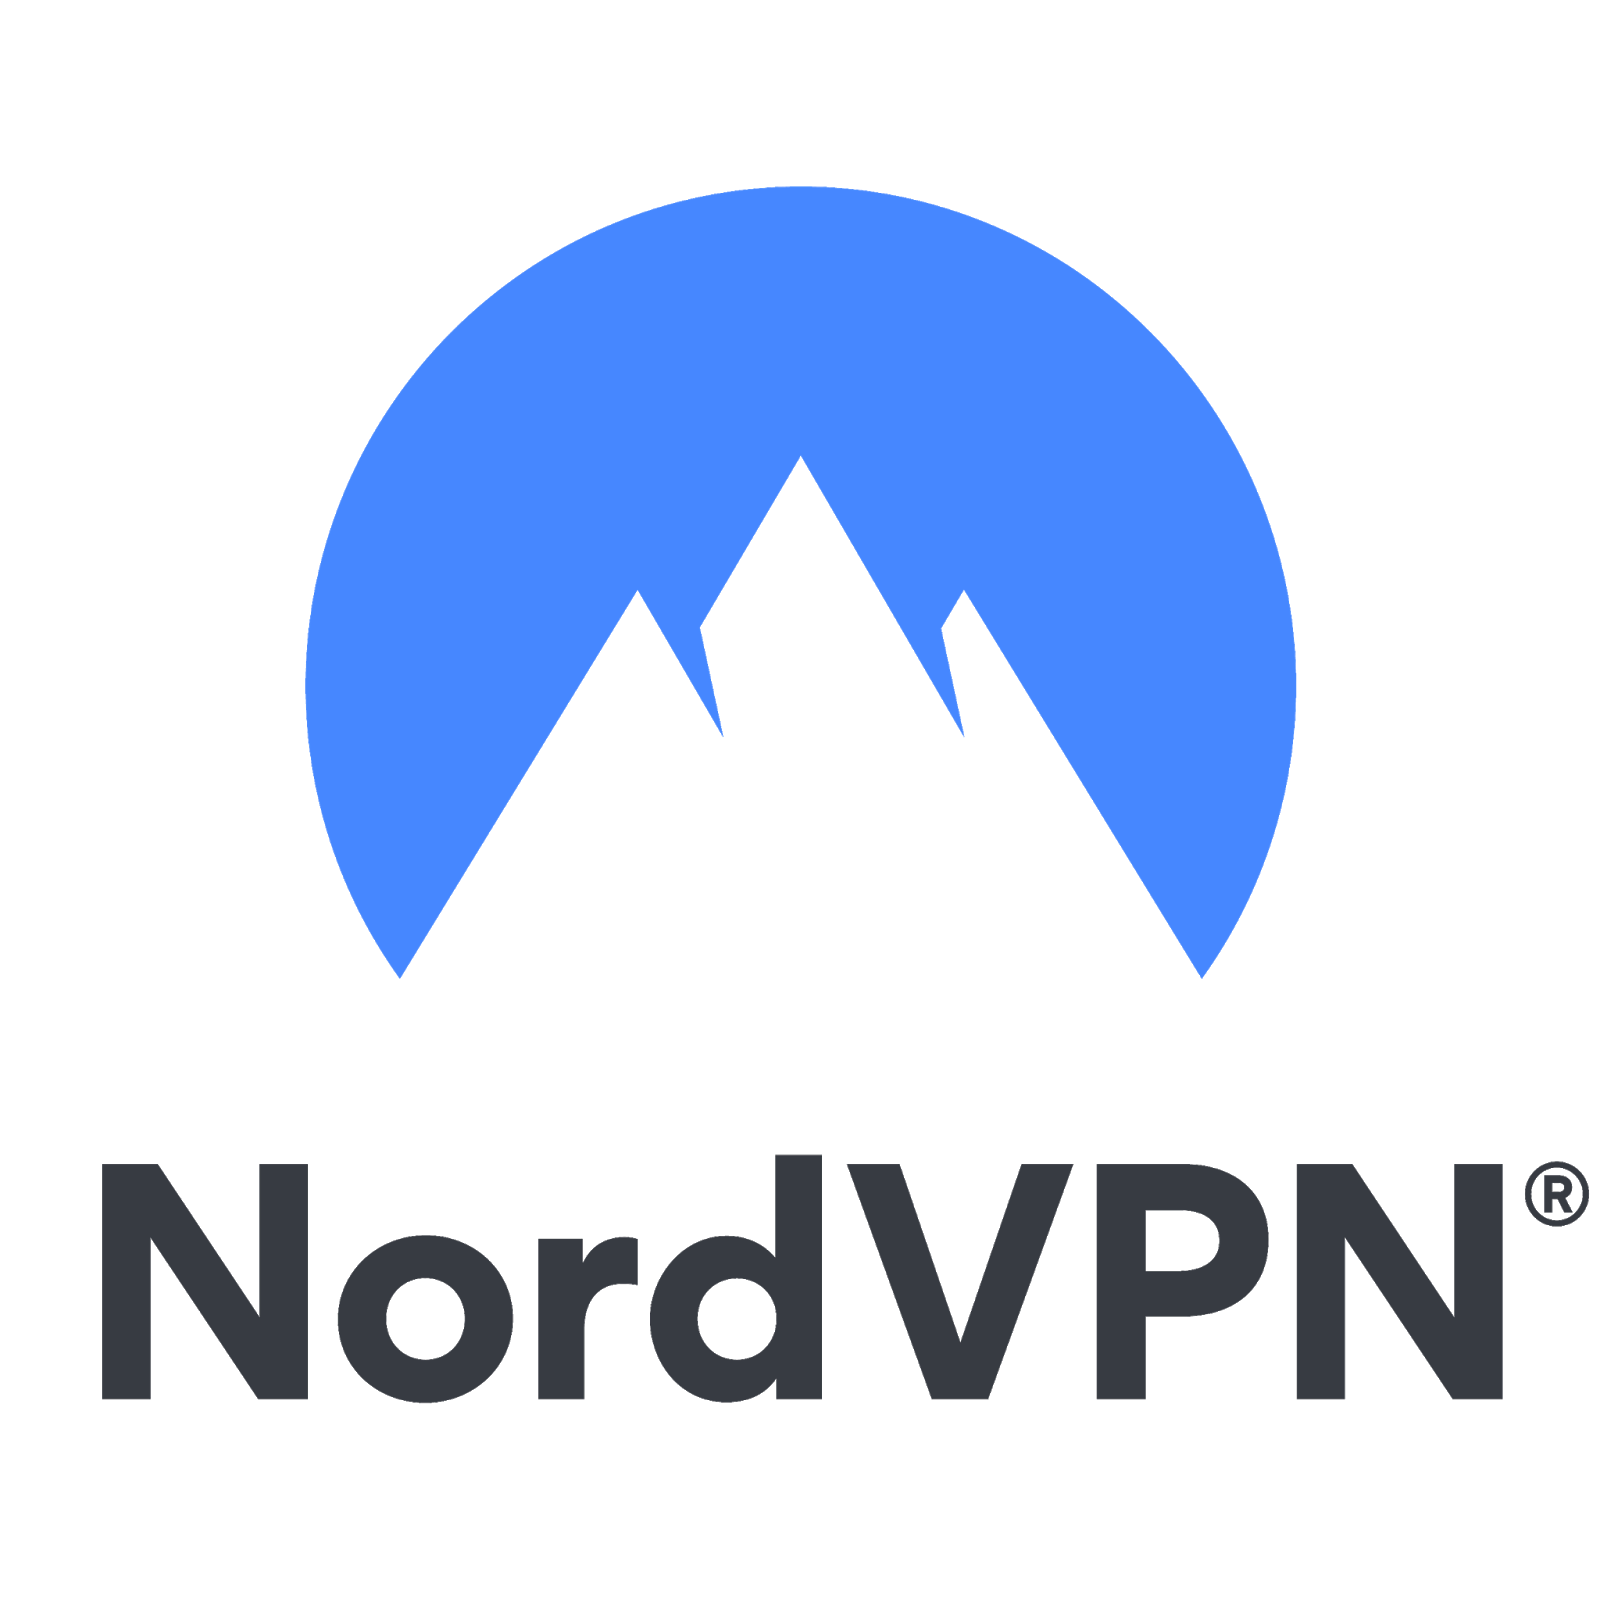 NordVPN 7.5.0 Crack With License Key Latest 2022 Free Download